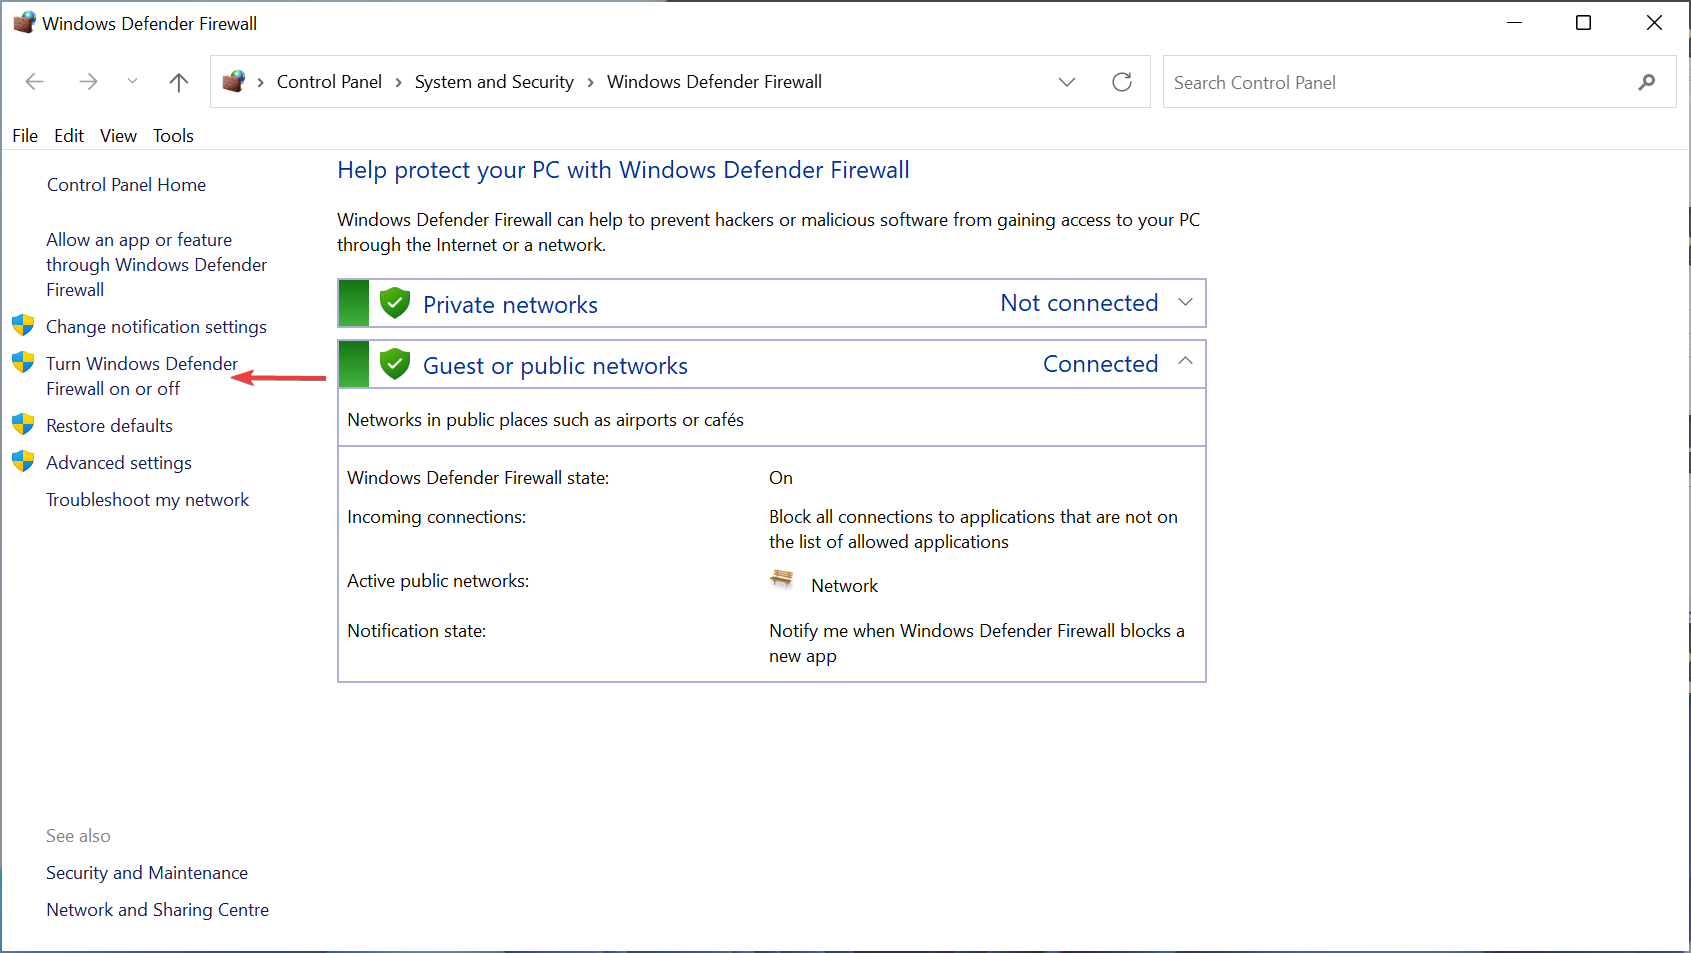 Click on Turn Windows Defender Firewall on or off